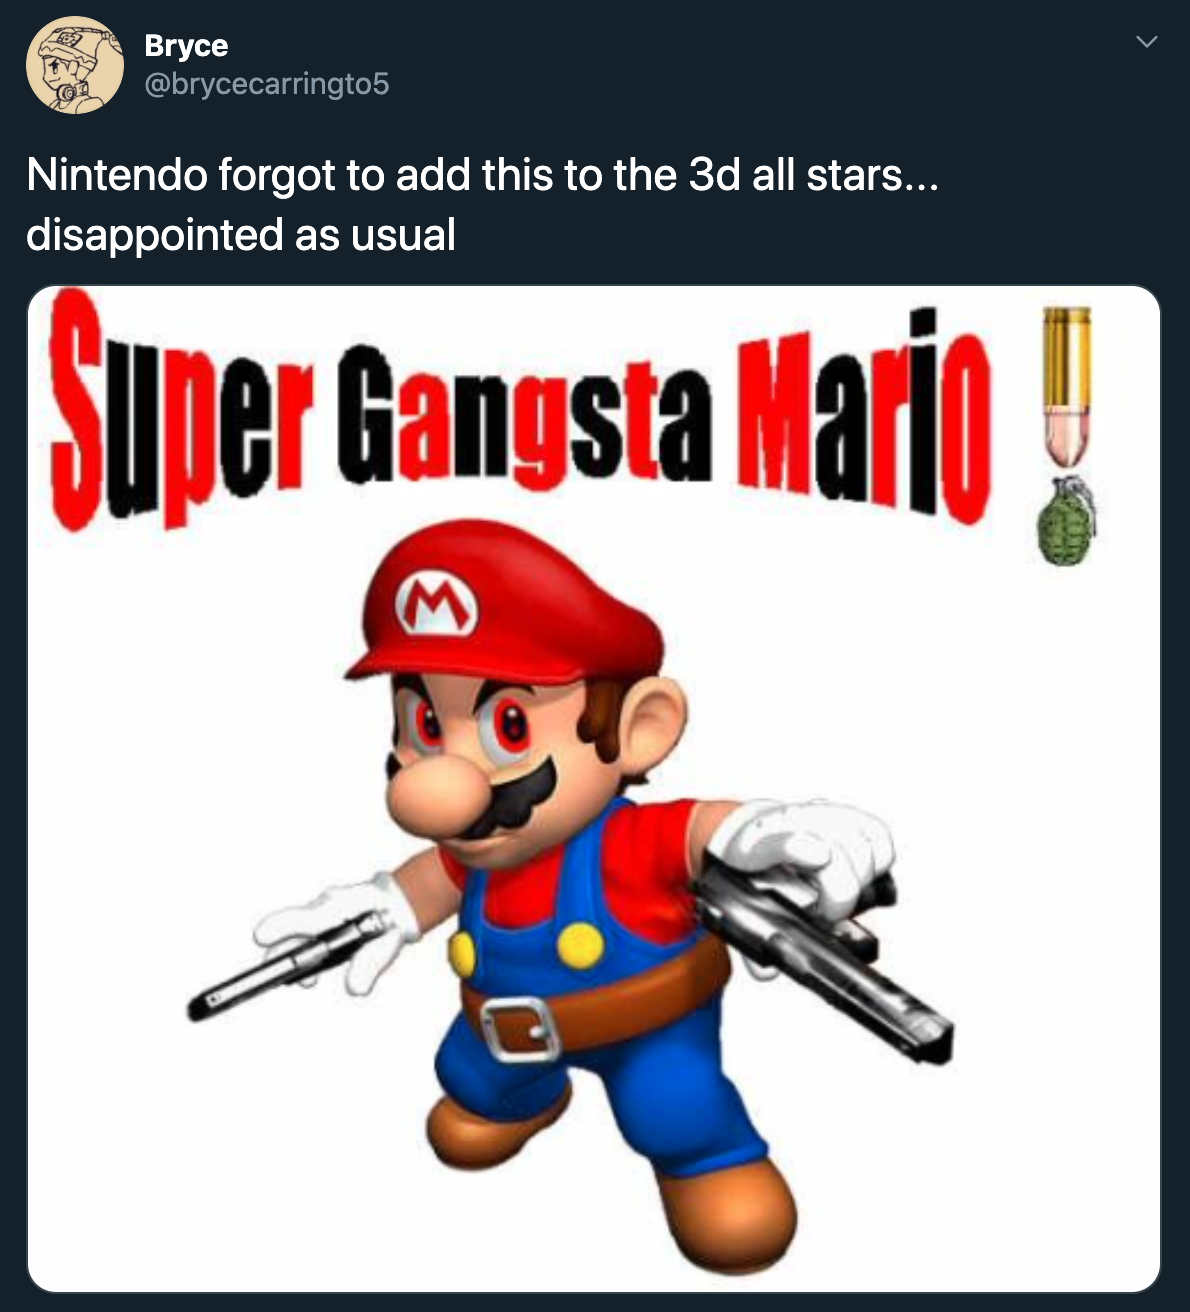 mario with guns - Nintendo forgot to add this to the 3d all stars... disappointed as usual Super Gangsta Mario